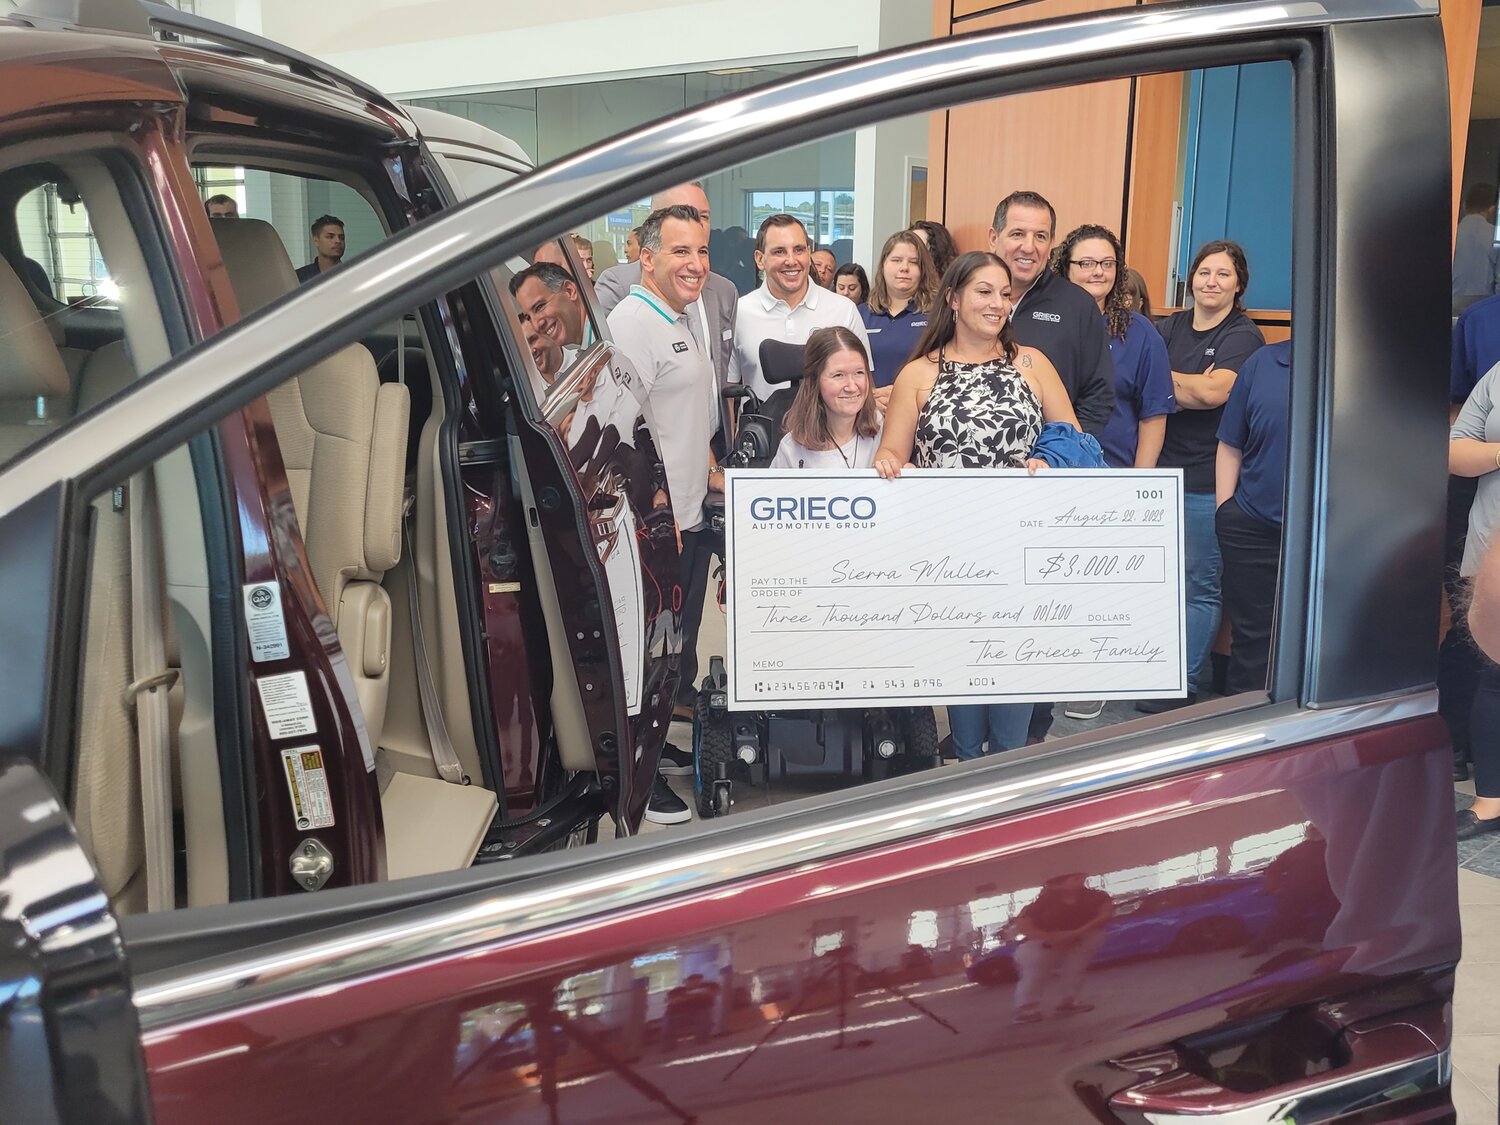 BIG CHECK: Seen through the drivers side window of the family’s new van, Robert Grieco, Pre-Owned Director and Grieco Auto Group Partner, presented Ciarra Muller with an oversized ceremonial check for $3,000 “for school supplies.” Her family joined her in the Grieco Honda showroom, where they also received a Honda Odyssey EX, fully equipped to accommodate Muller’s wheelchair.